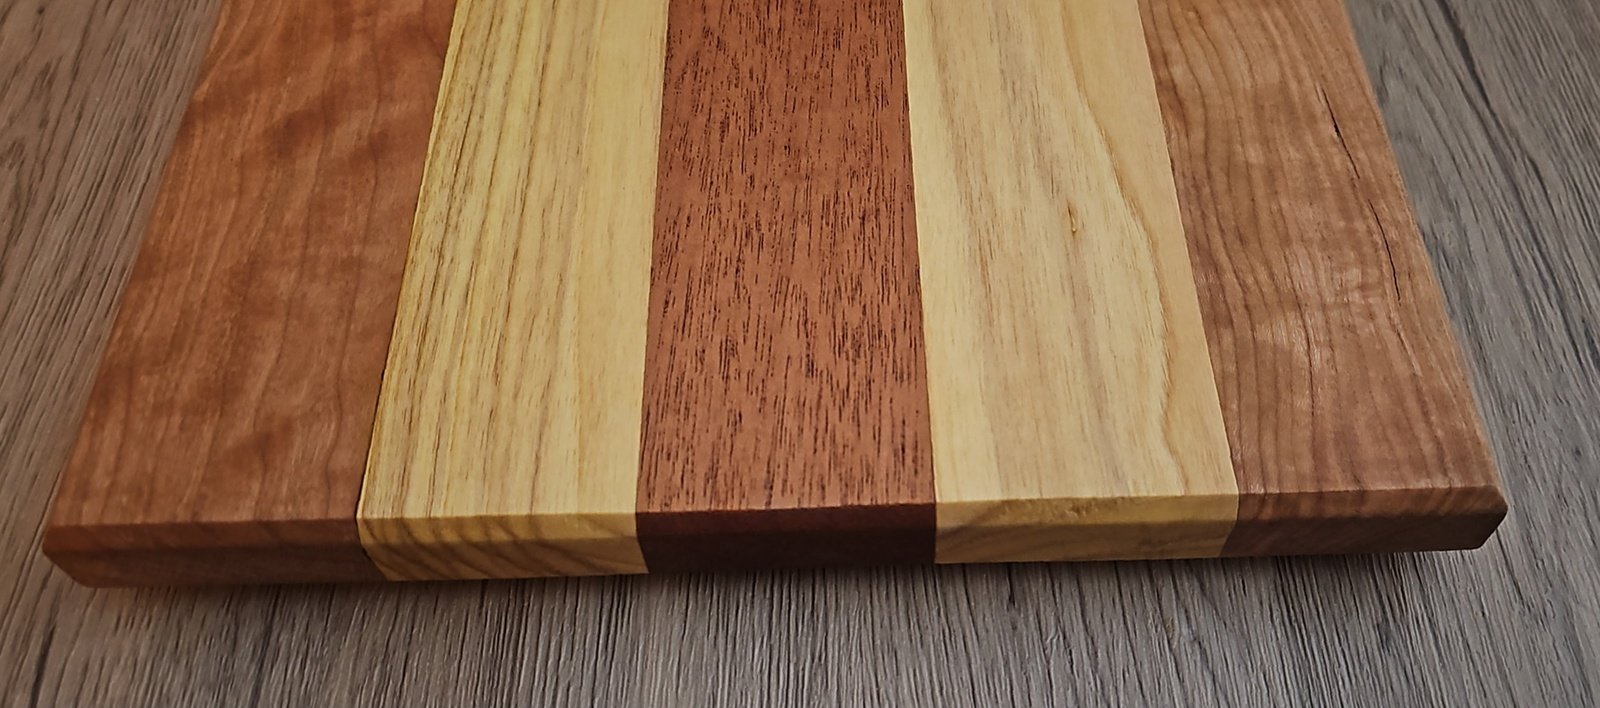 Cherry, and Mulberry Charcuterie Boards/Serving Board/Cutting Board